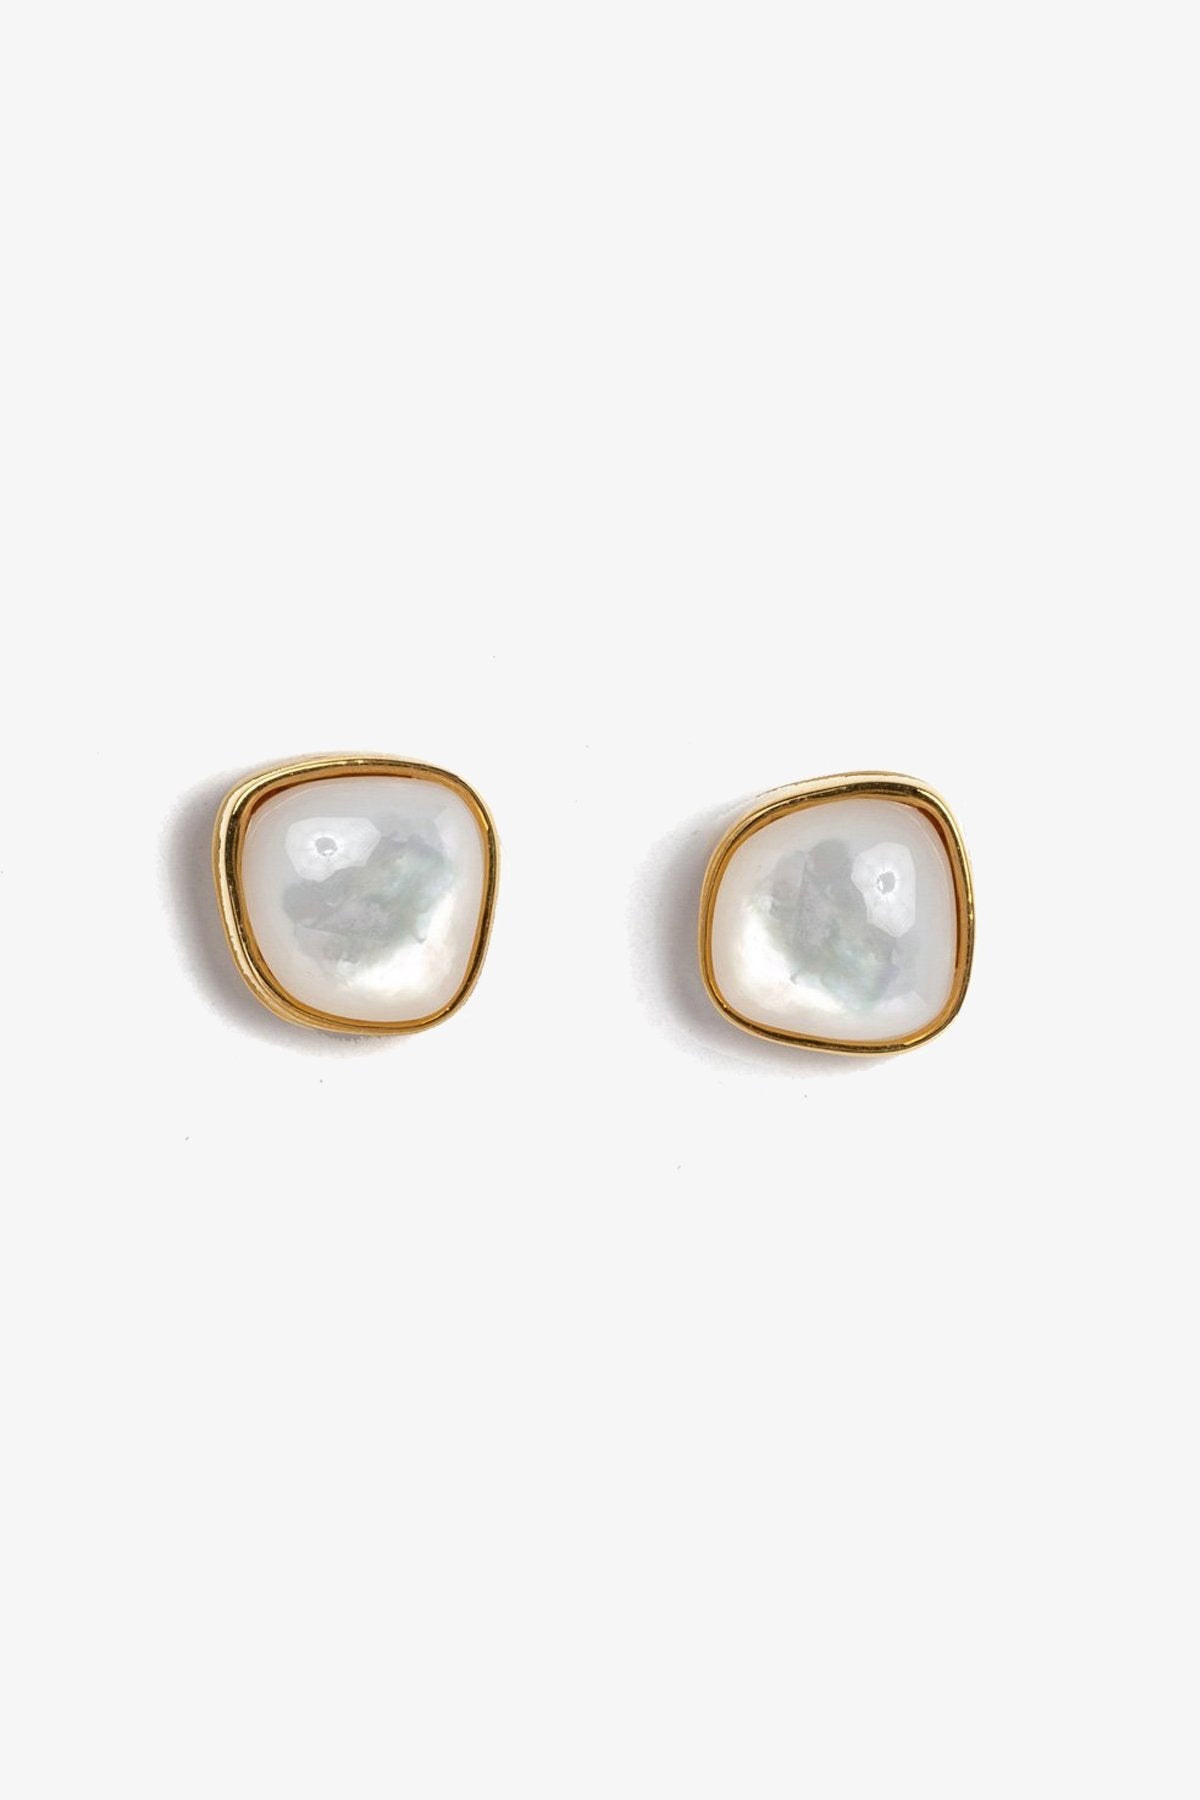 Bay Studs in Mother of Pearl - shop-olivia.com